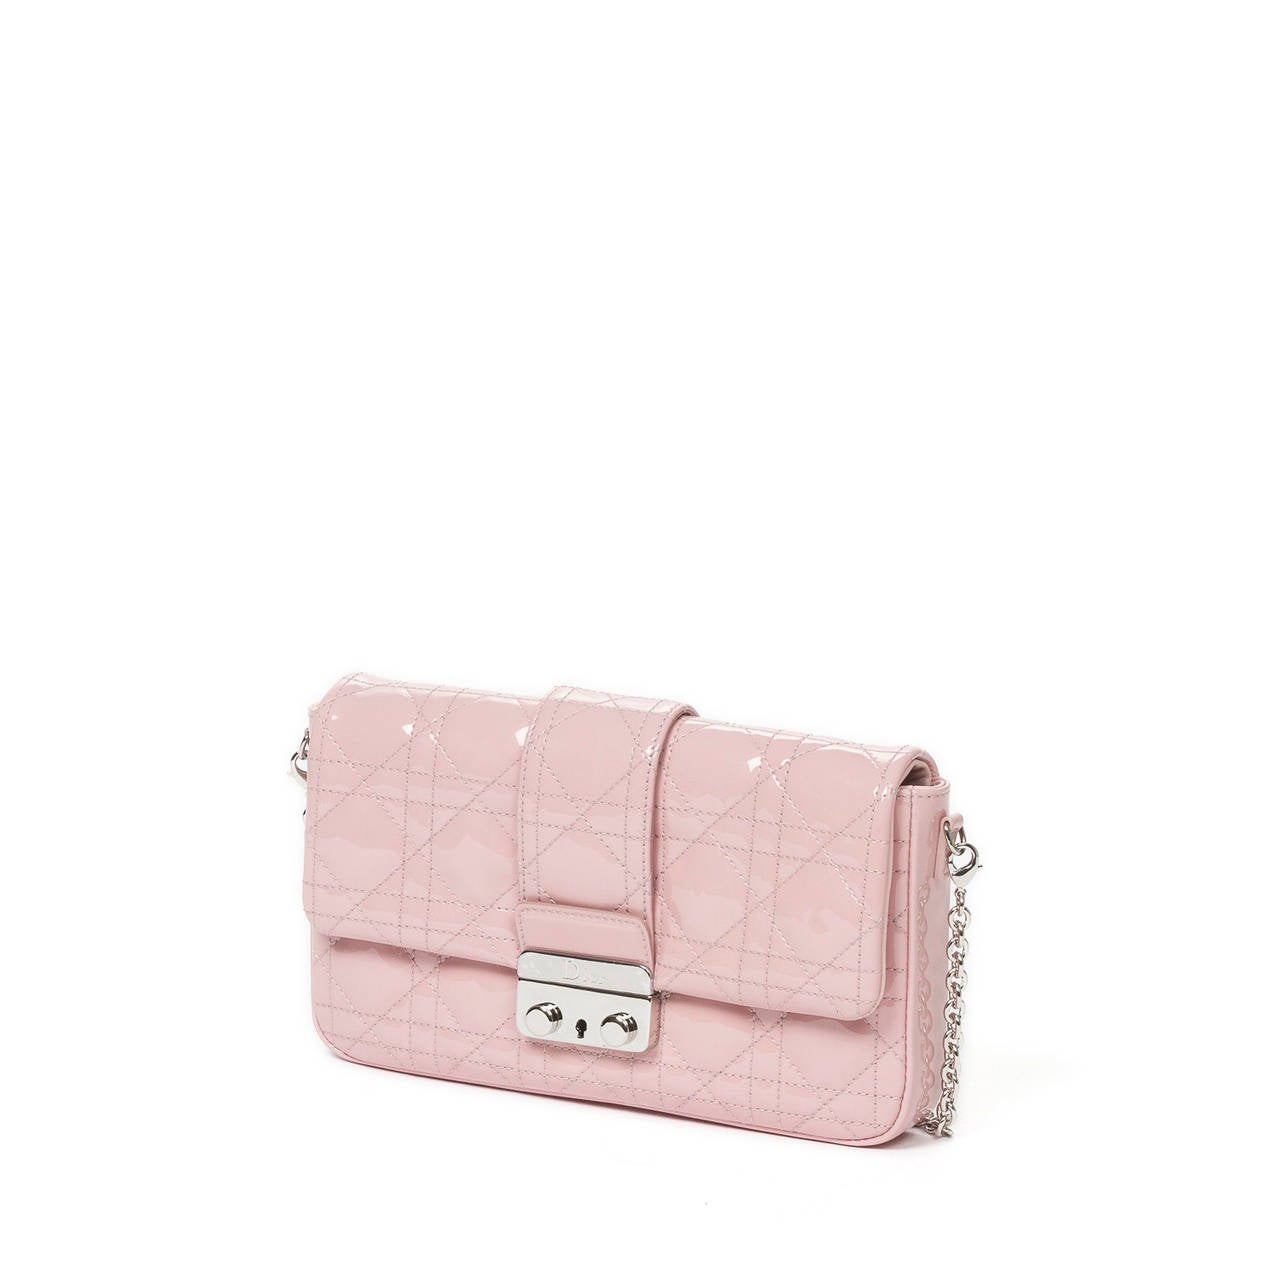 Miss Dior pouch in light pink cannage patent leather with long silver tone chain strap. Light pink leather interior with slip pocket and 6 credit card compartments. Dustbag included. Brand new condition.